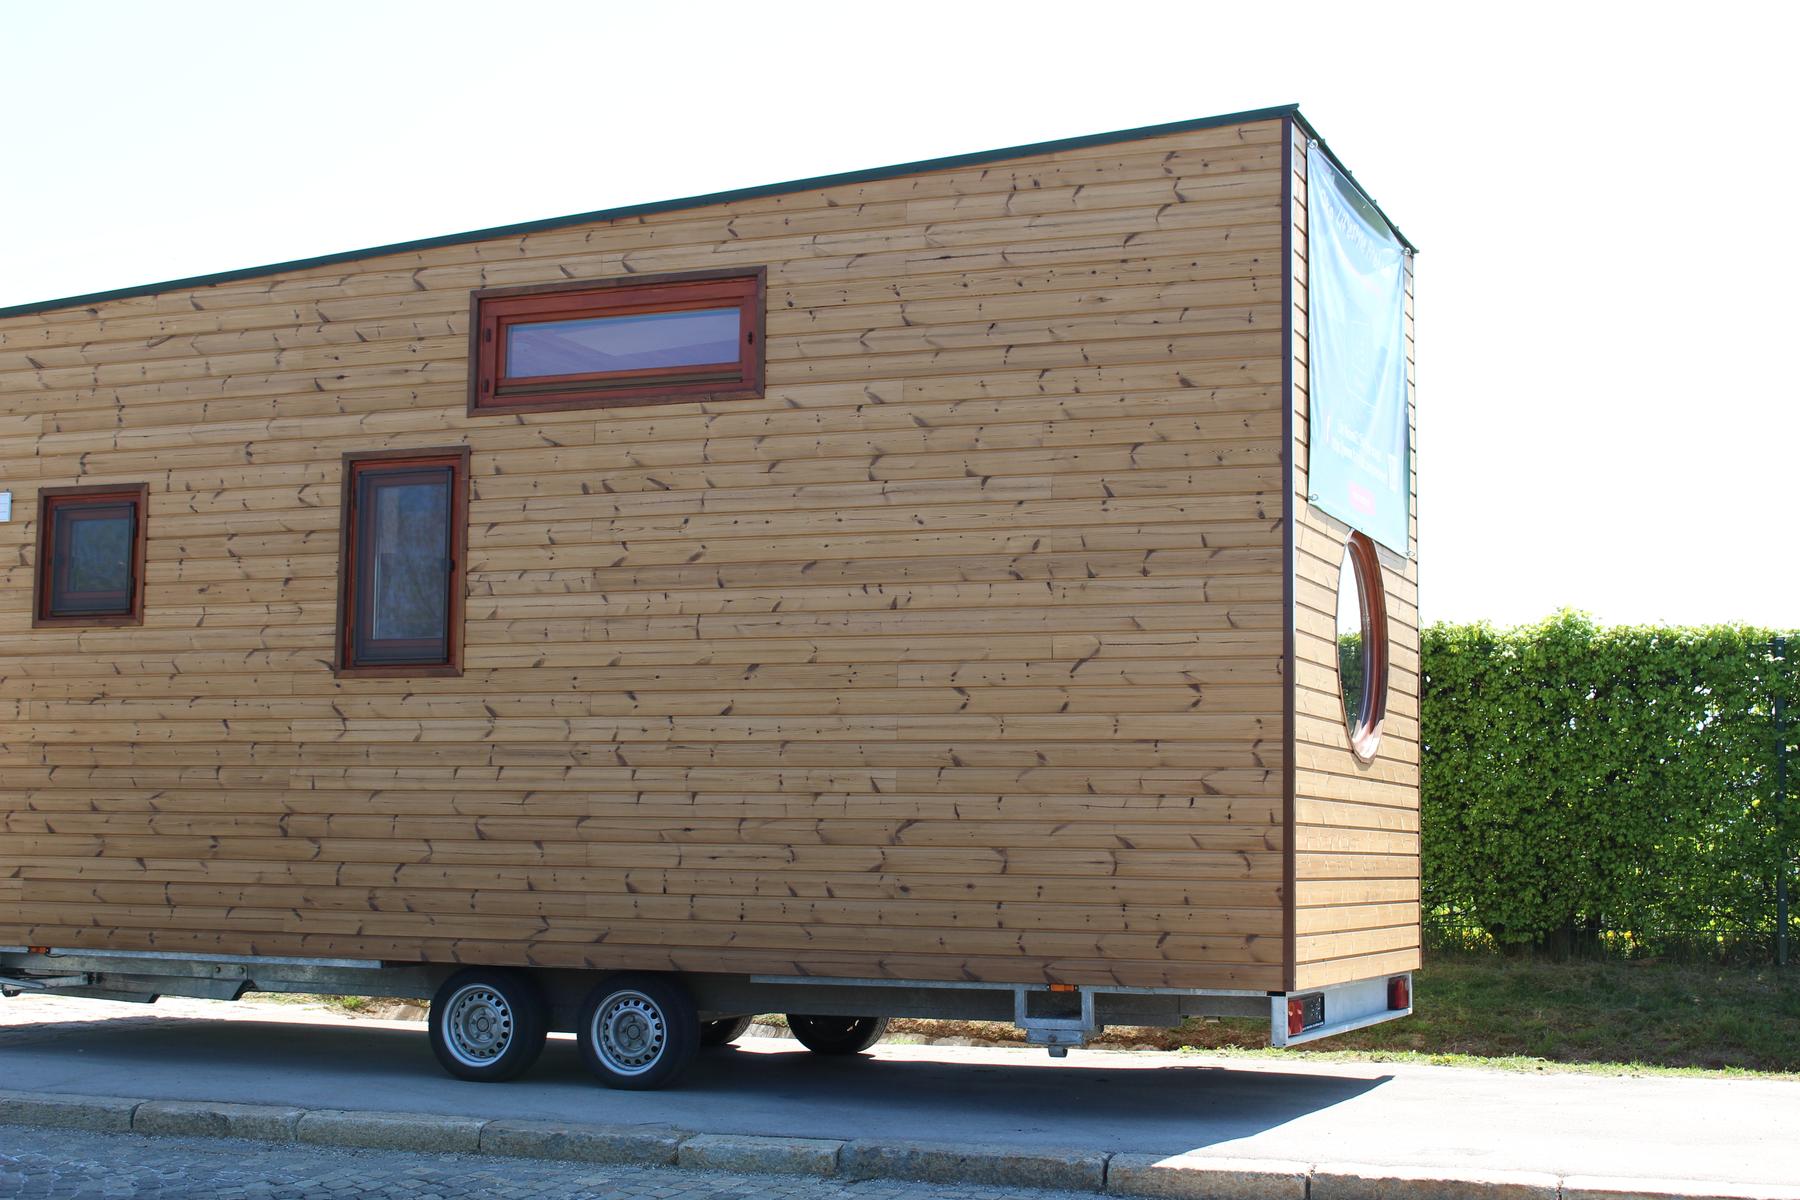 File:NimmE.net Tiny House Österreich.jpg - a small house on wheels